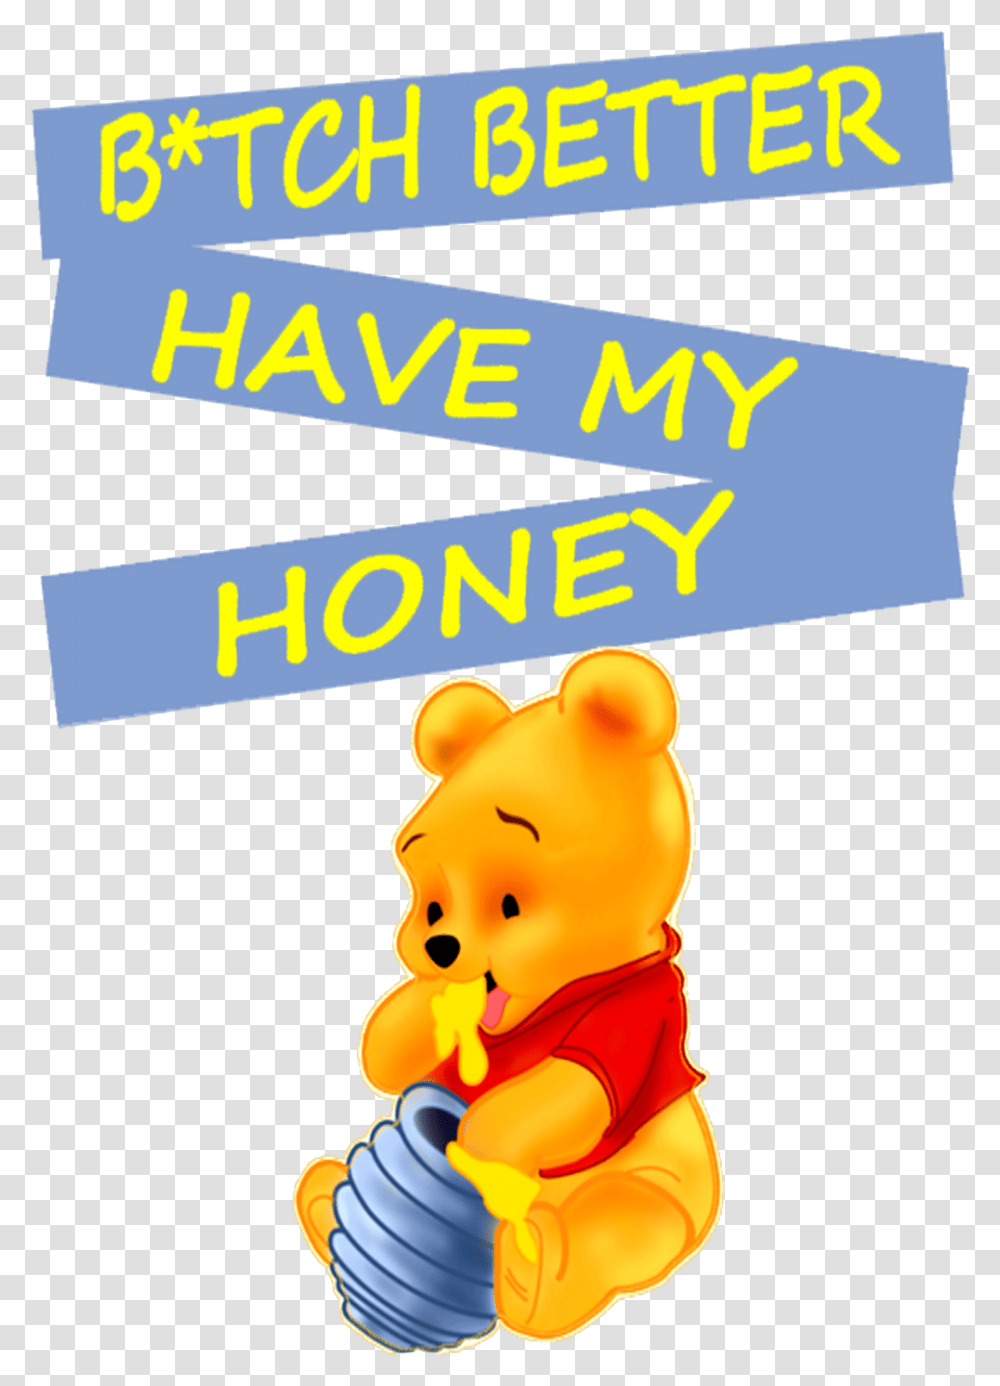 Winnie The Pooh Btch Better Have My Honey Funny Fun Cartoon, Toy, Label Transparent Png